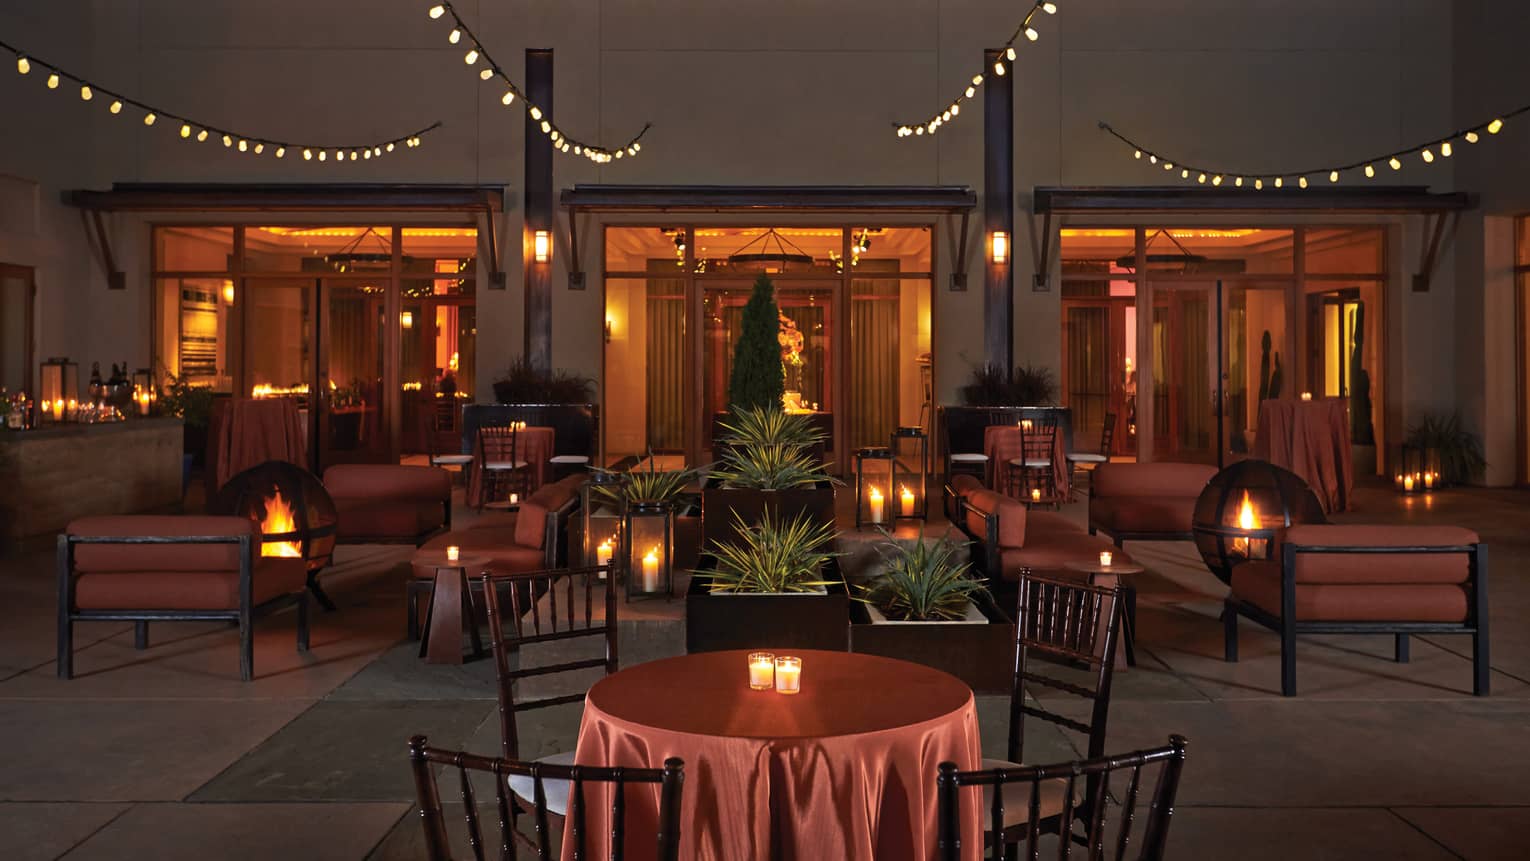 Terra courtyard at night, lounge furniture surrounding fire pits, candles, strings of lights 